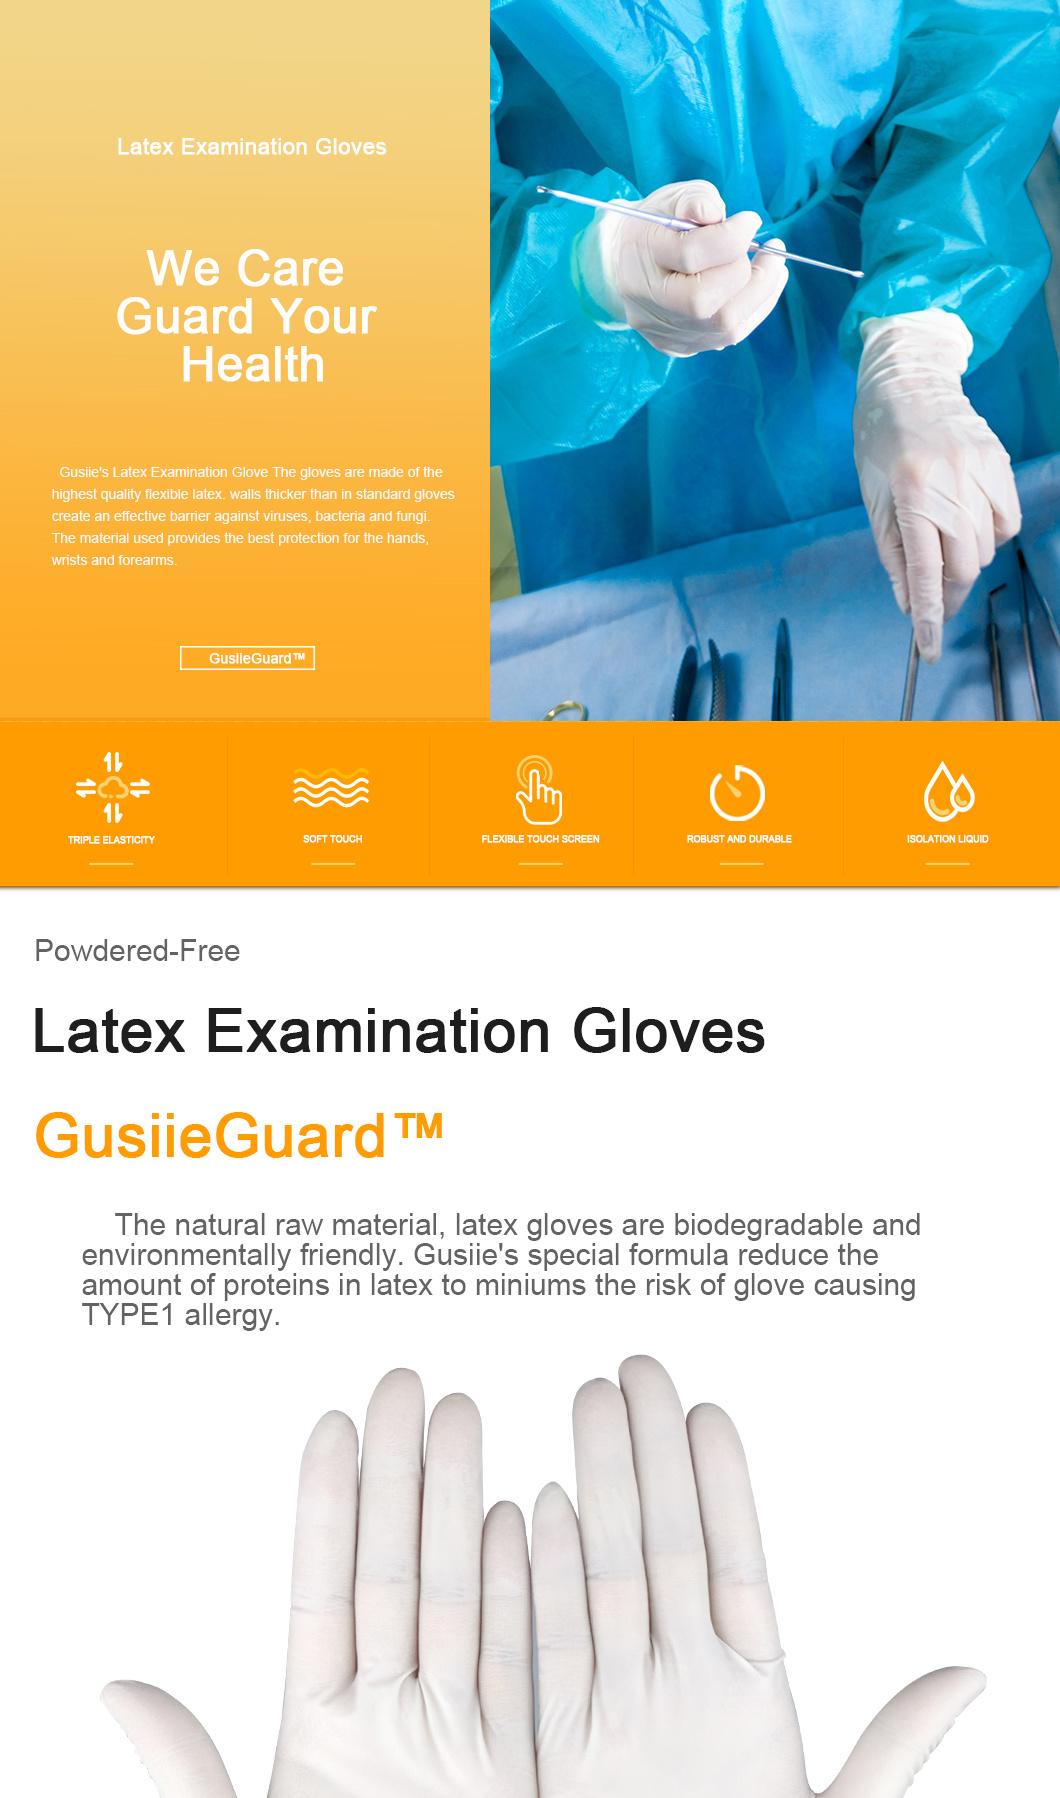 Medical Glove Latex Examination Glove (S/M/L-Large, 100-Count) Latex Disposable, Ultra-Strong, Exam, Healthcare, Food Handling Use No Powder Latex Gloves